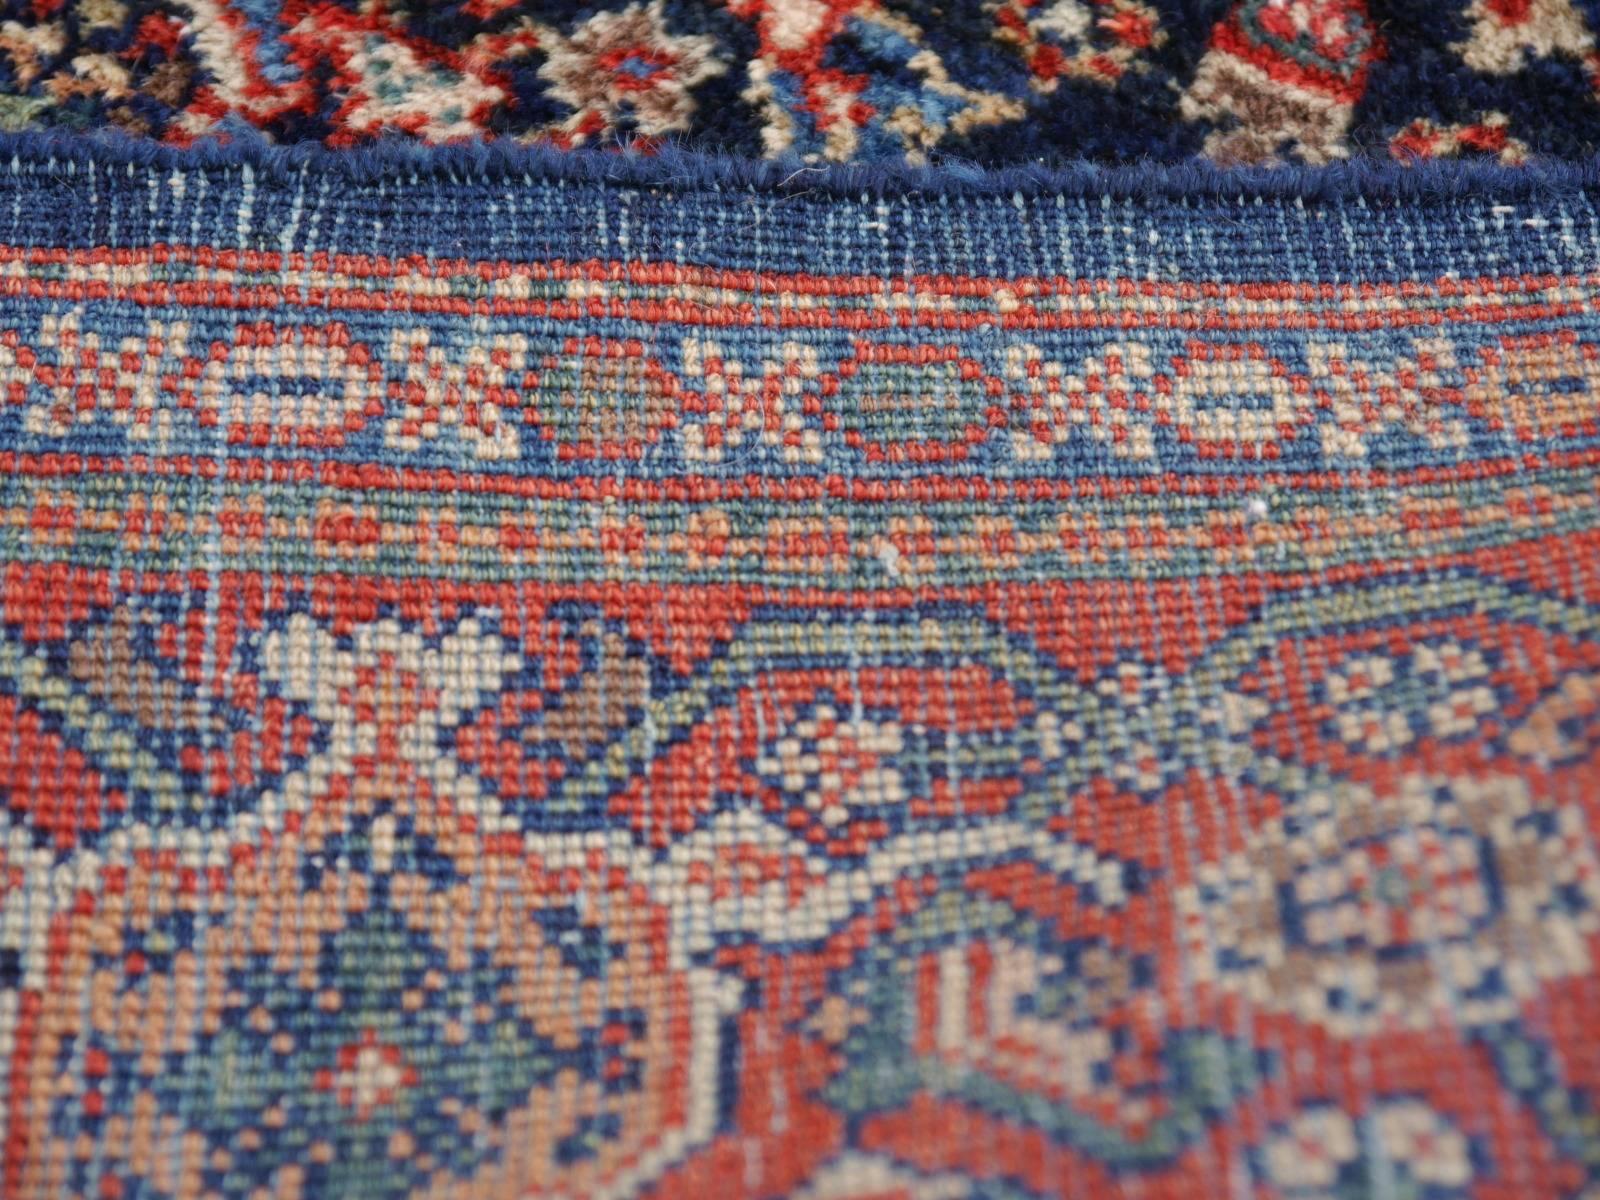 A fine and hand-knotted antique rug in very good condition. It has very good pile condition, is soft and has a beautiful luster - a perfect interior design rug. Lower pile at the edges.
The Djoharian Design Collection is located in Germany, all our